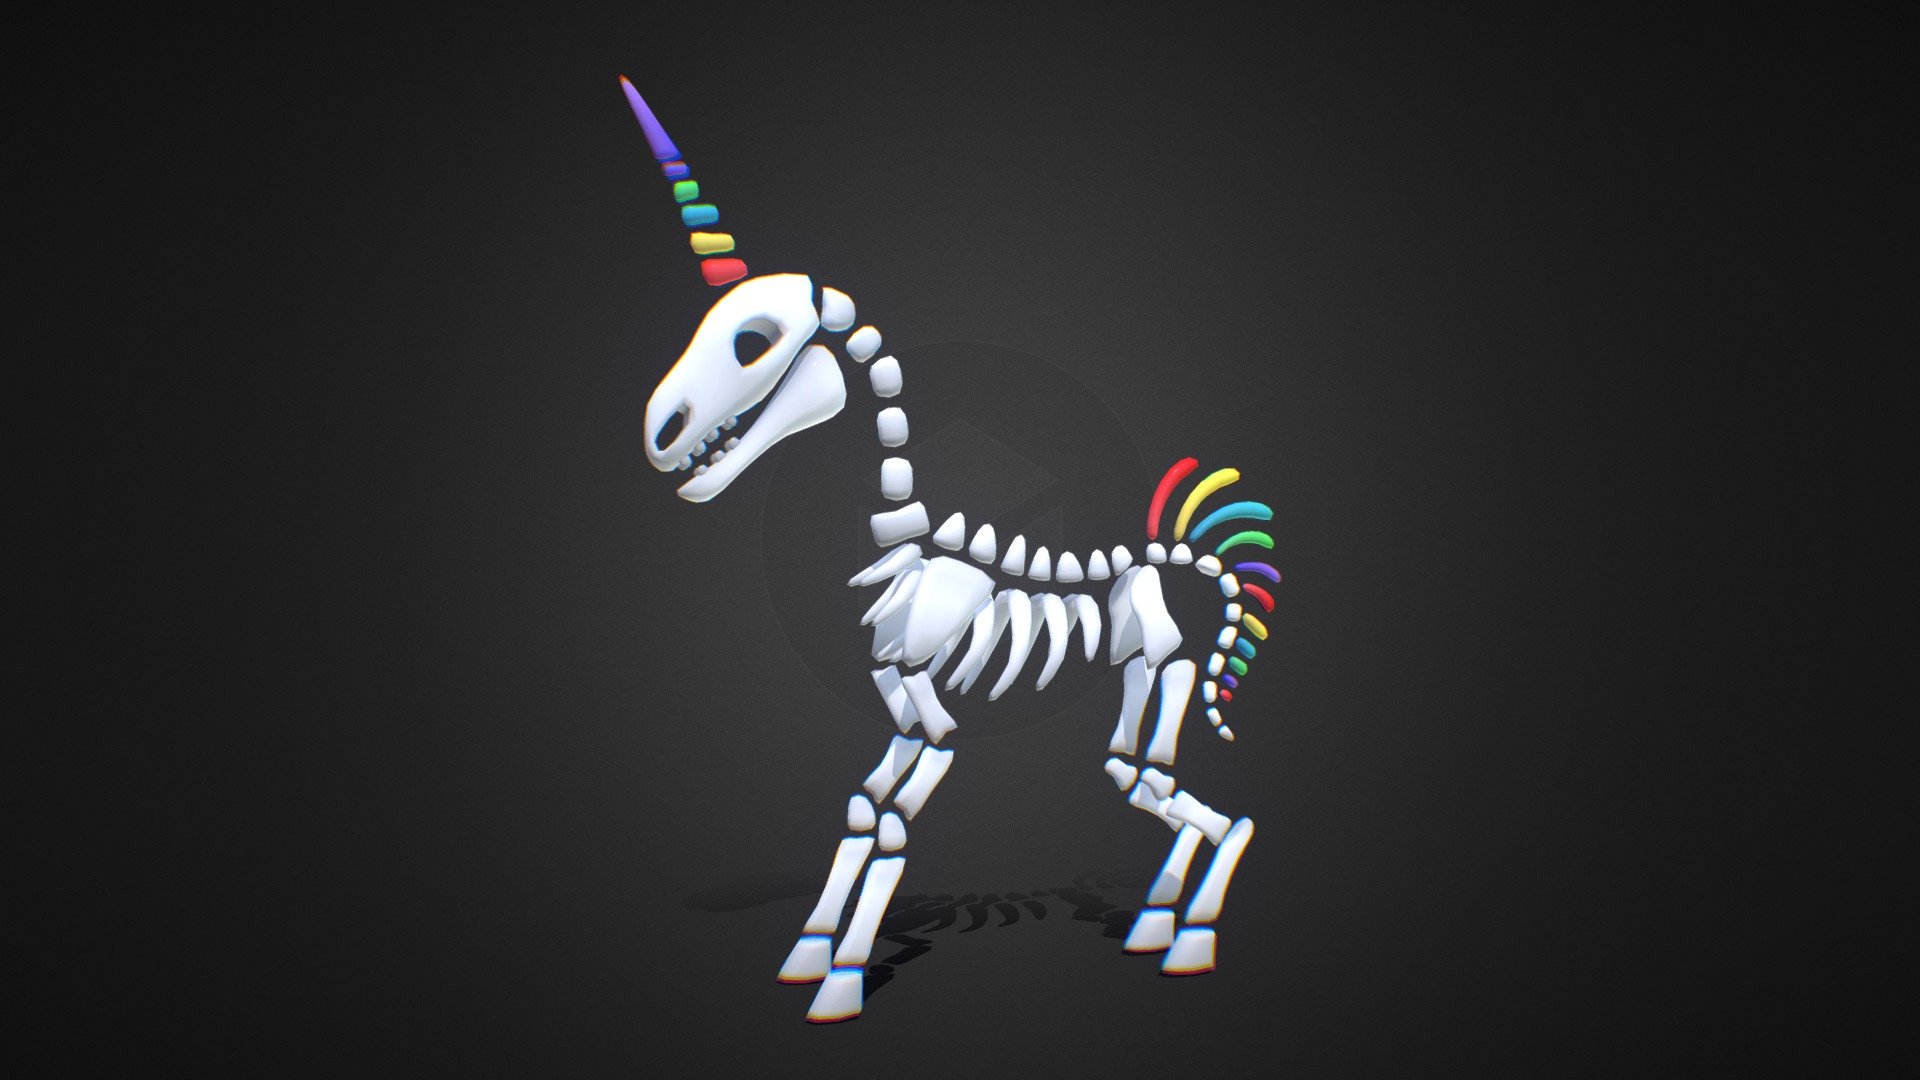 I made this model a while back for an interactive AR scene at work. If you're interested, you can check it out here: click - Skeleton Unicorn - Download Free 3D model by Slo-mo Witch (@SloMoWitch) 3d model